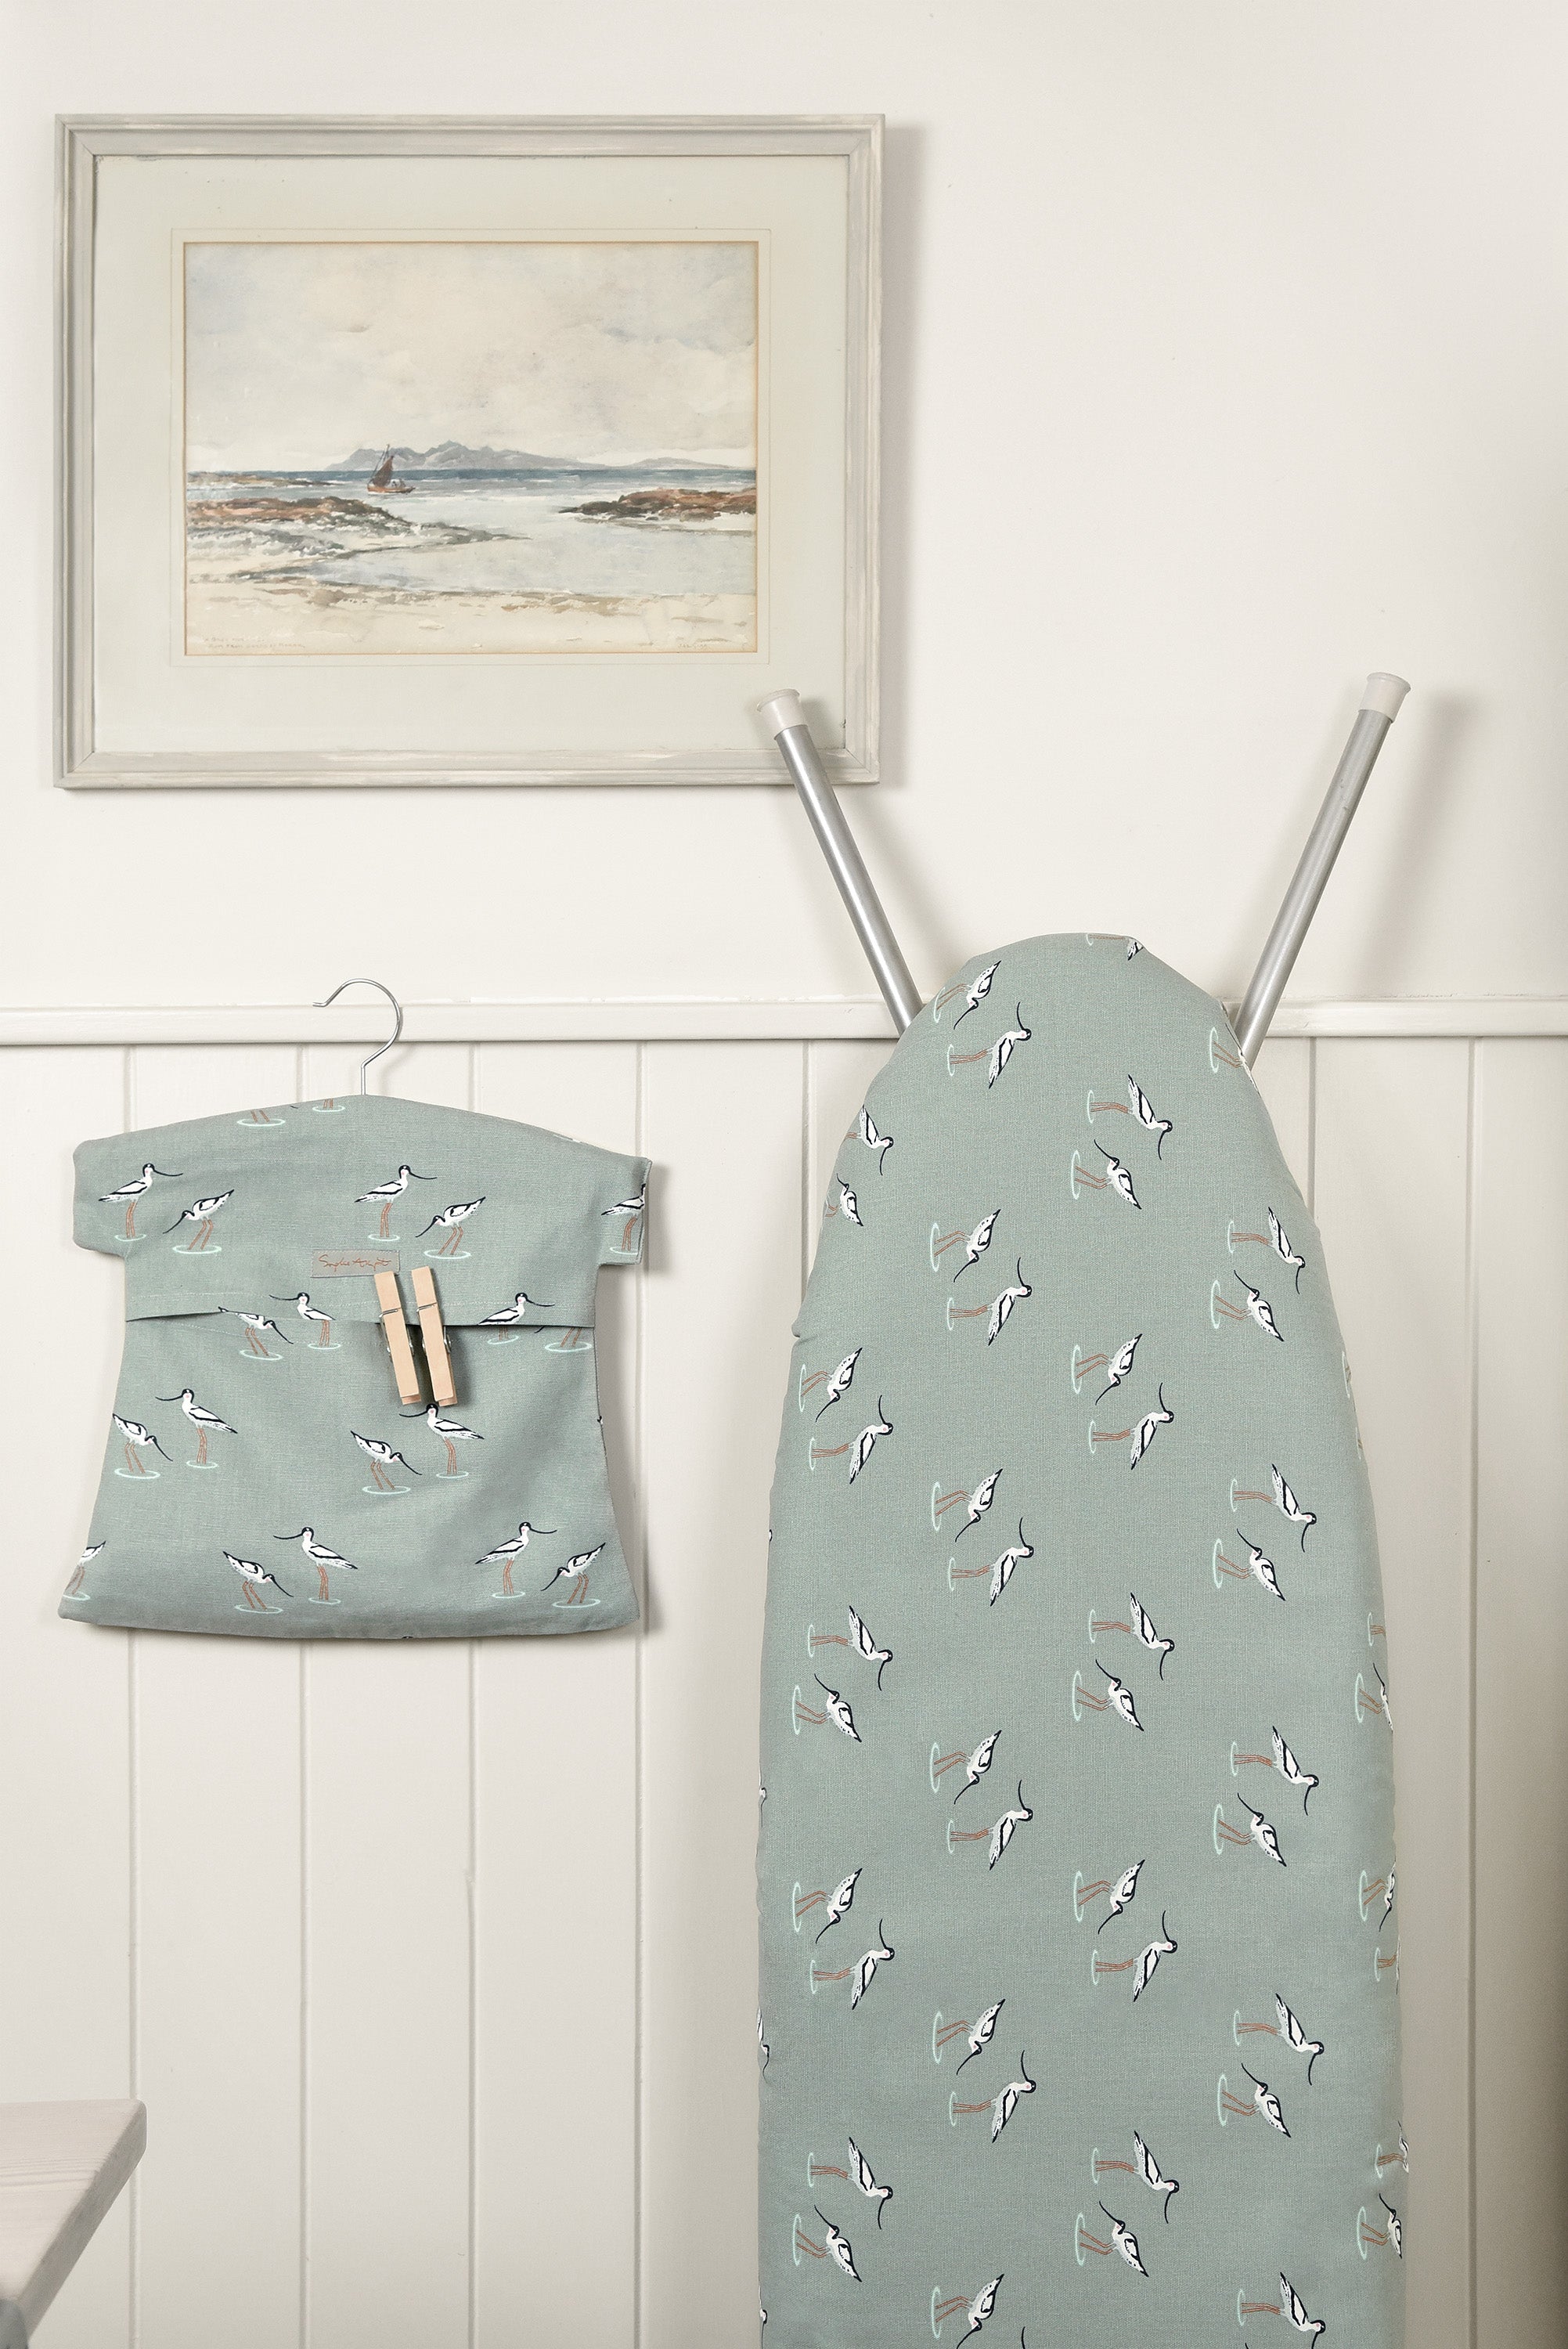 Sophie Allport utility room inspiration in sea blue green coastal birds design, a lovely ironing board cover and peg bag.